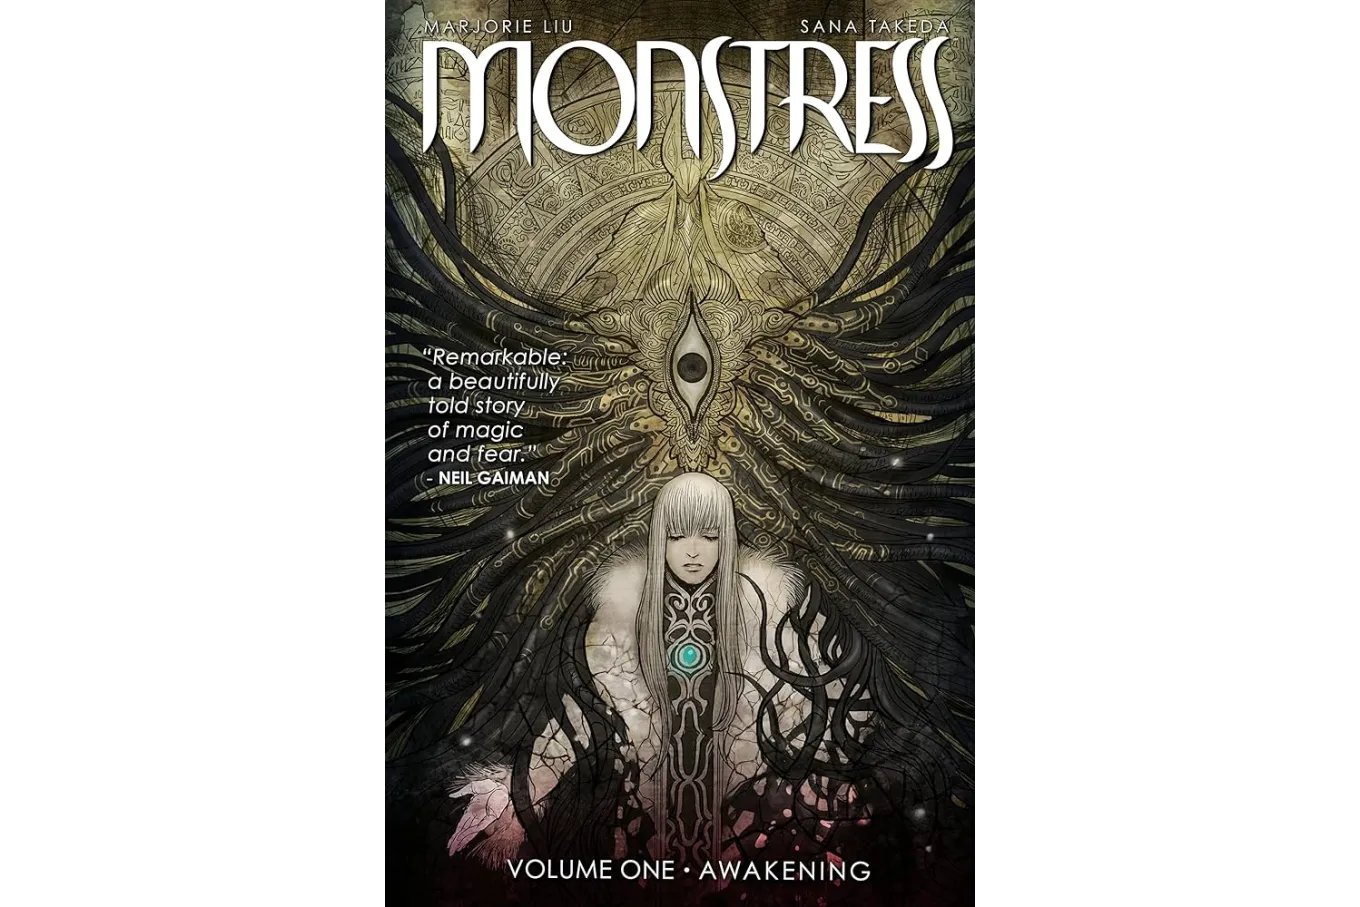 Cover of Monstress Vol. 1